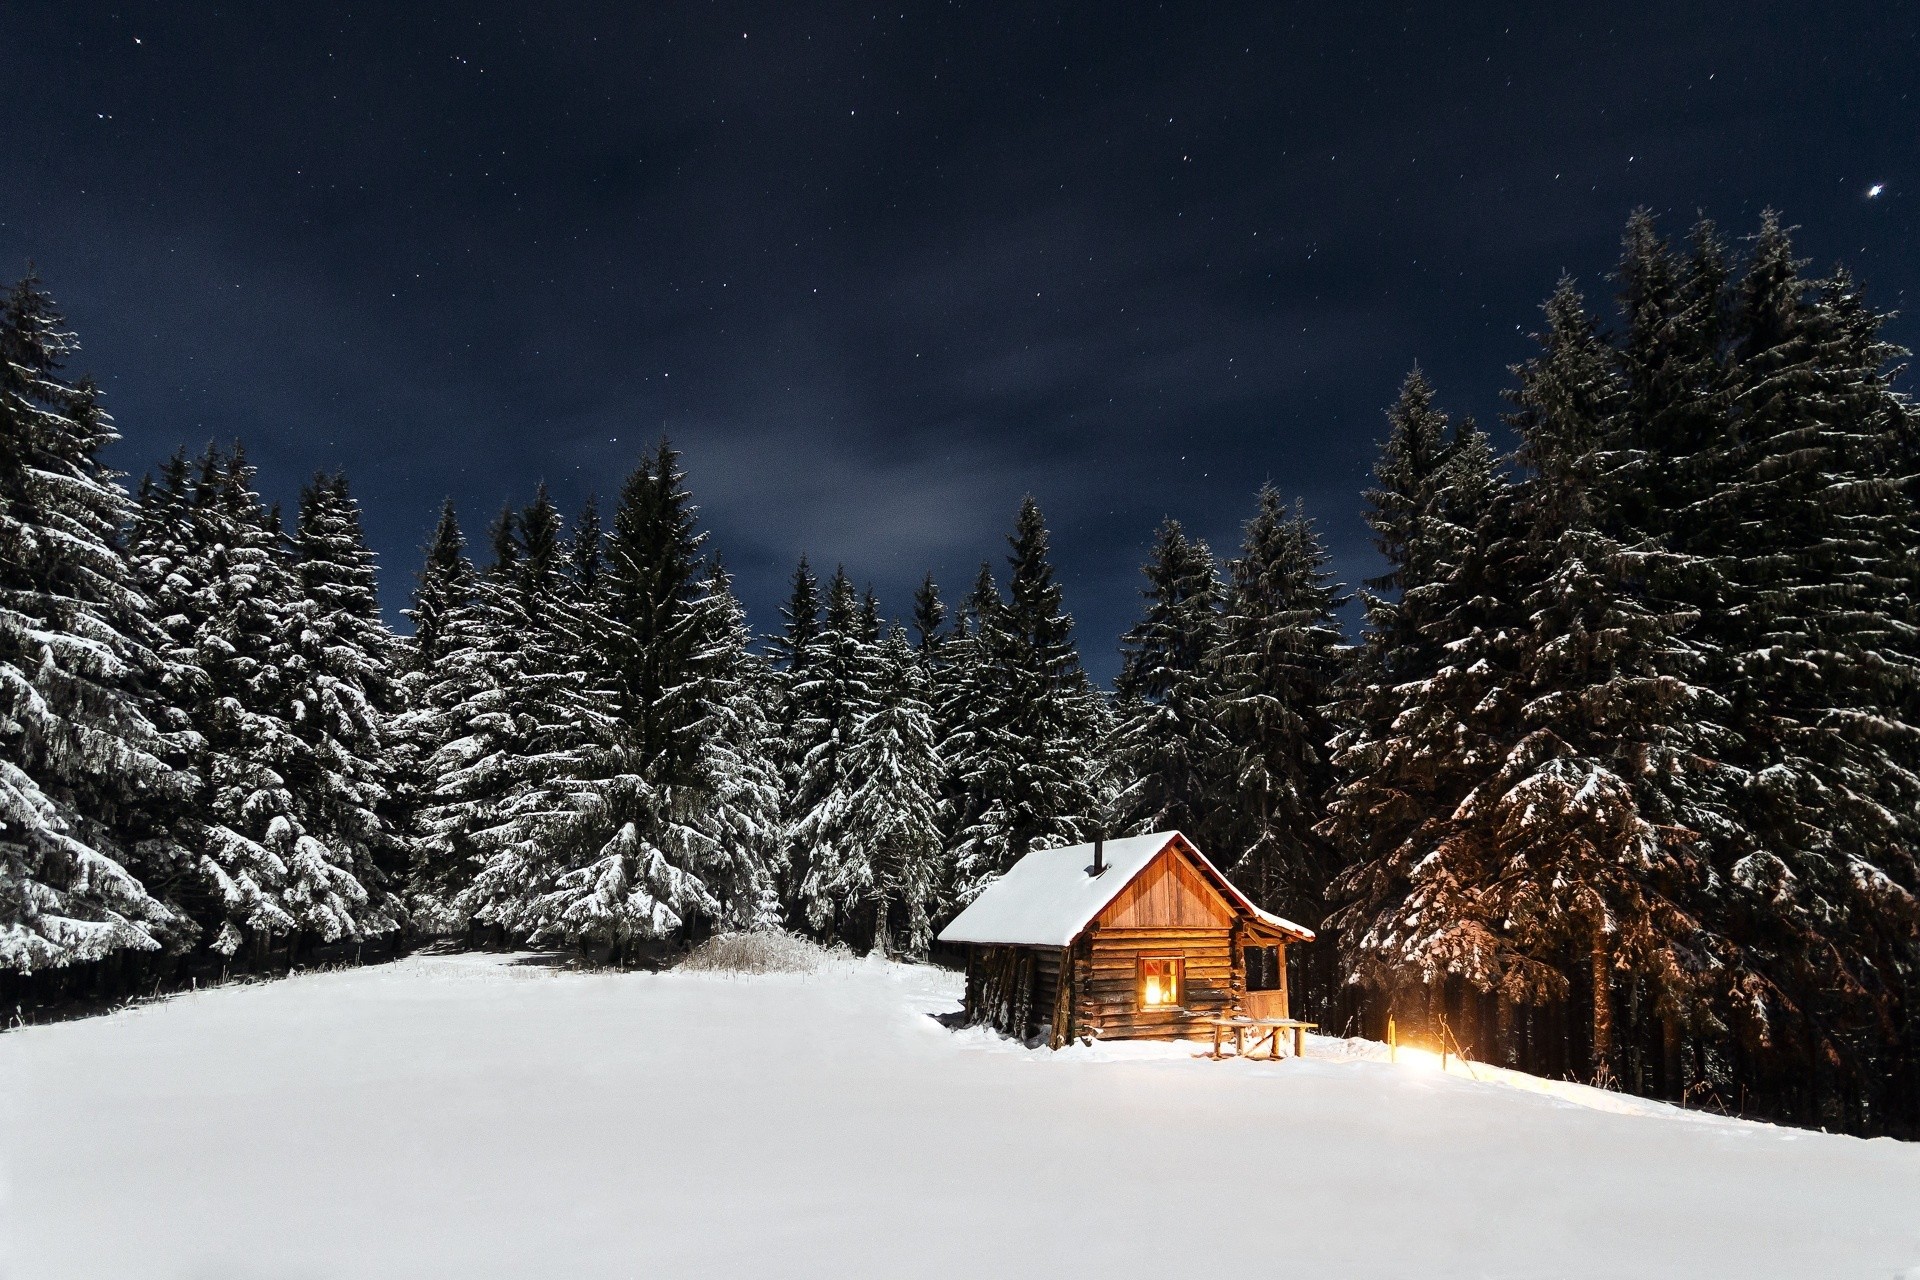 General 1920x1280 snow pine trees stars cabin winter night starred sky forest low light